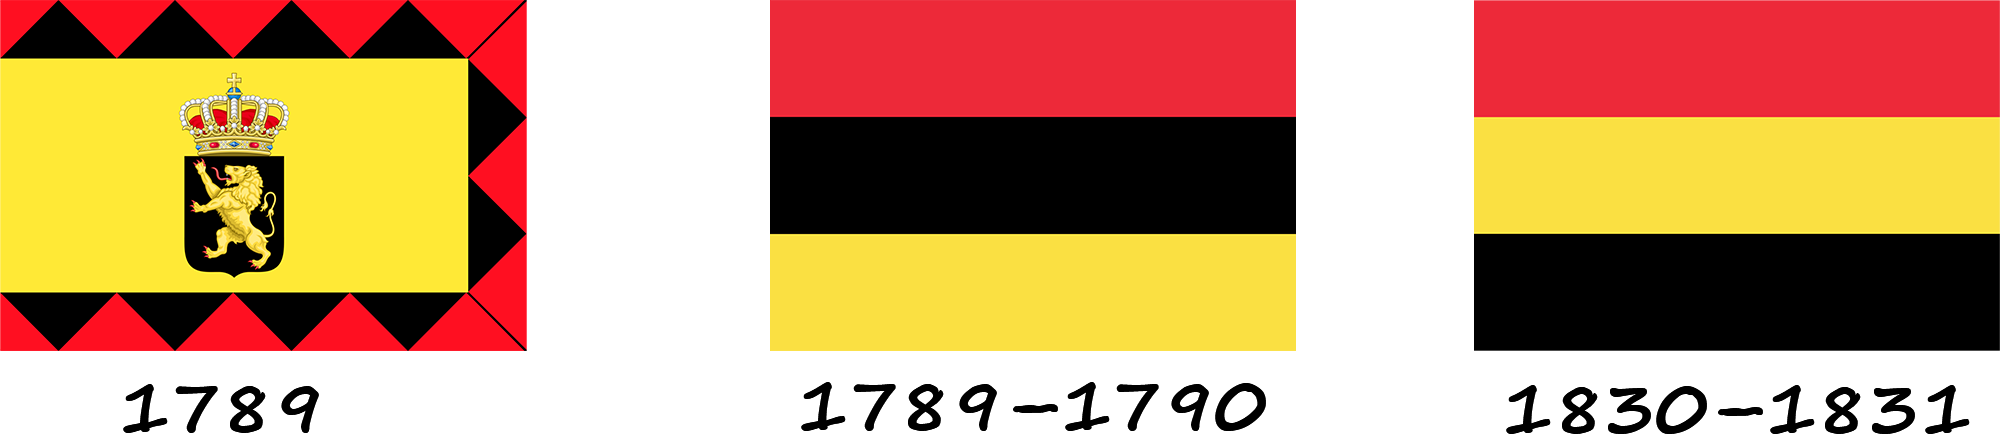 History of the Belgian flag